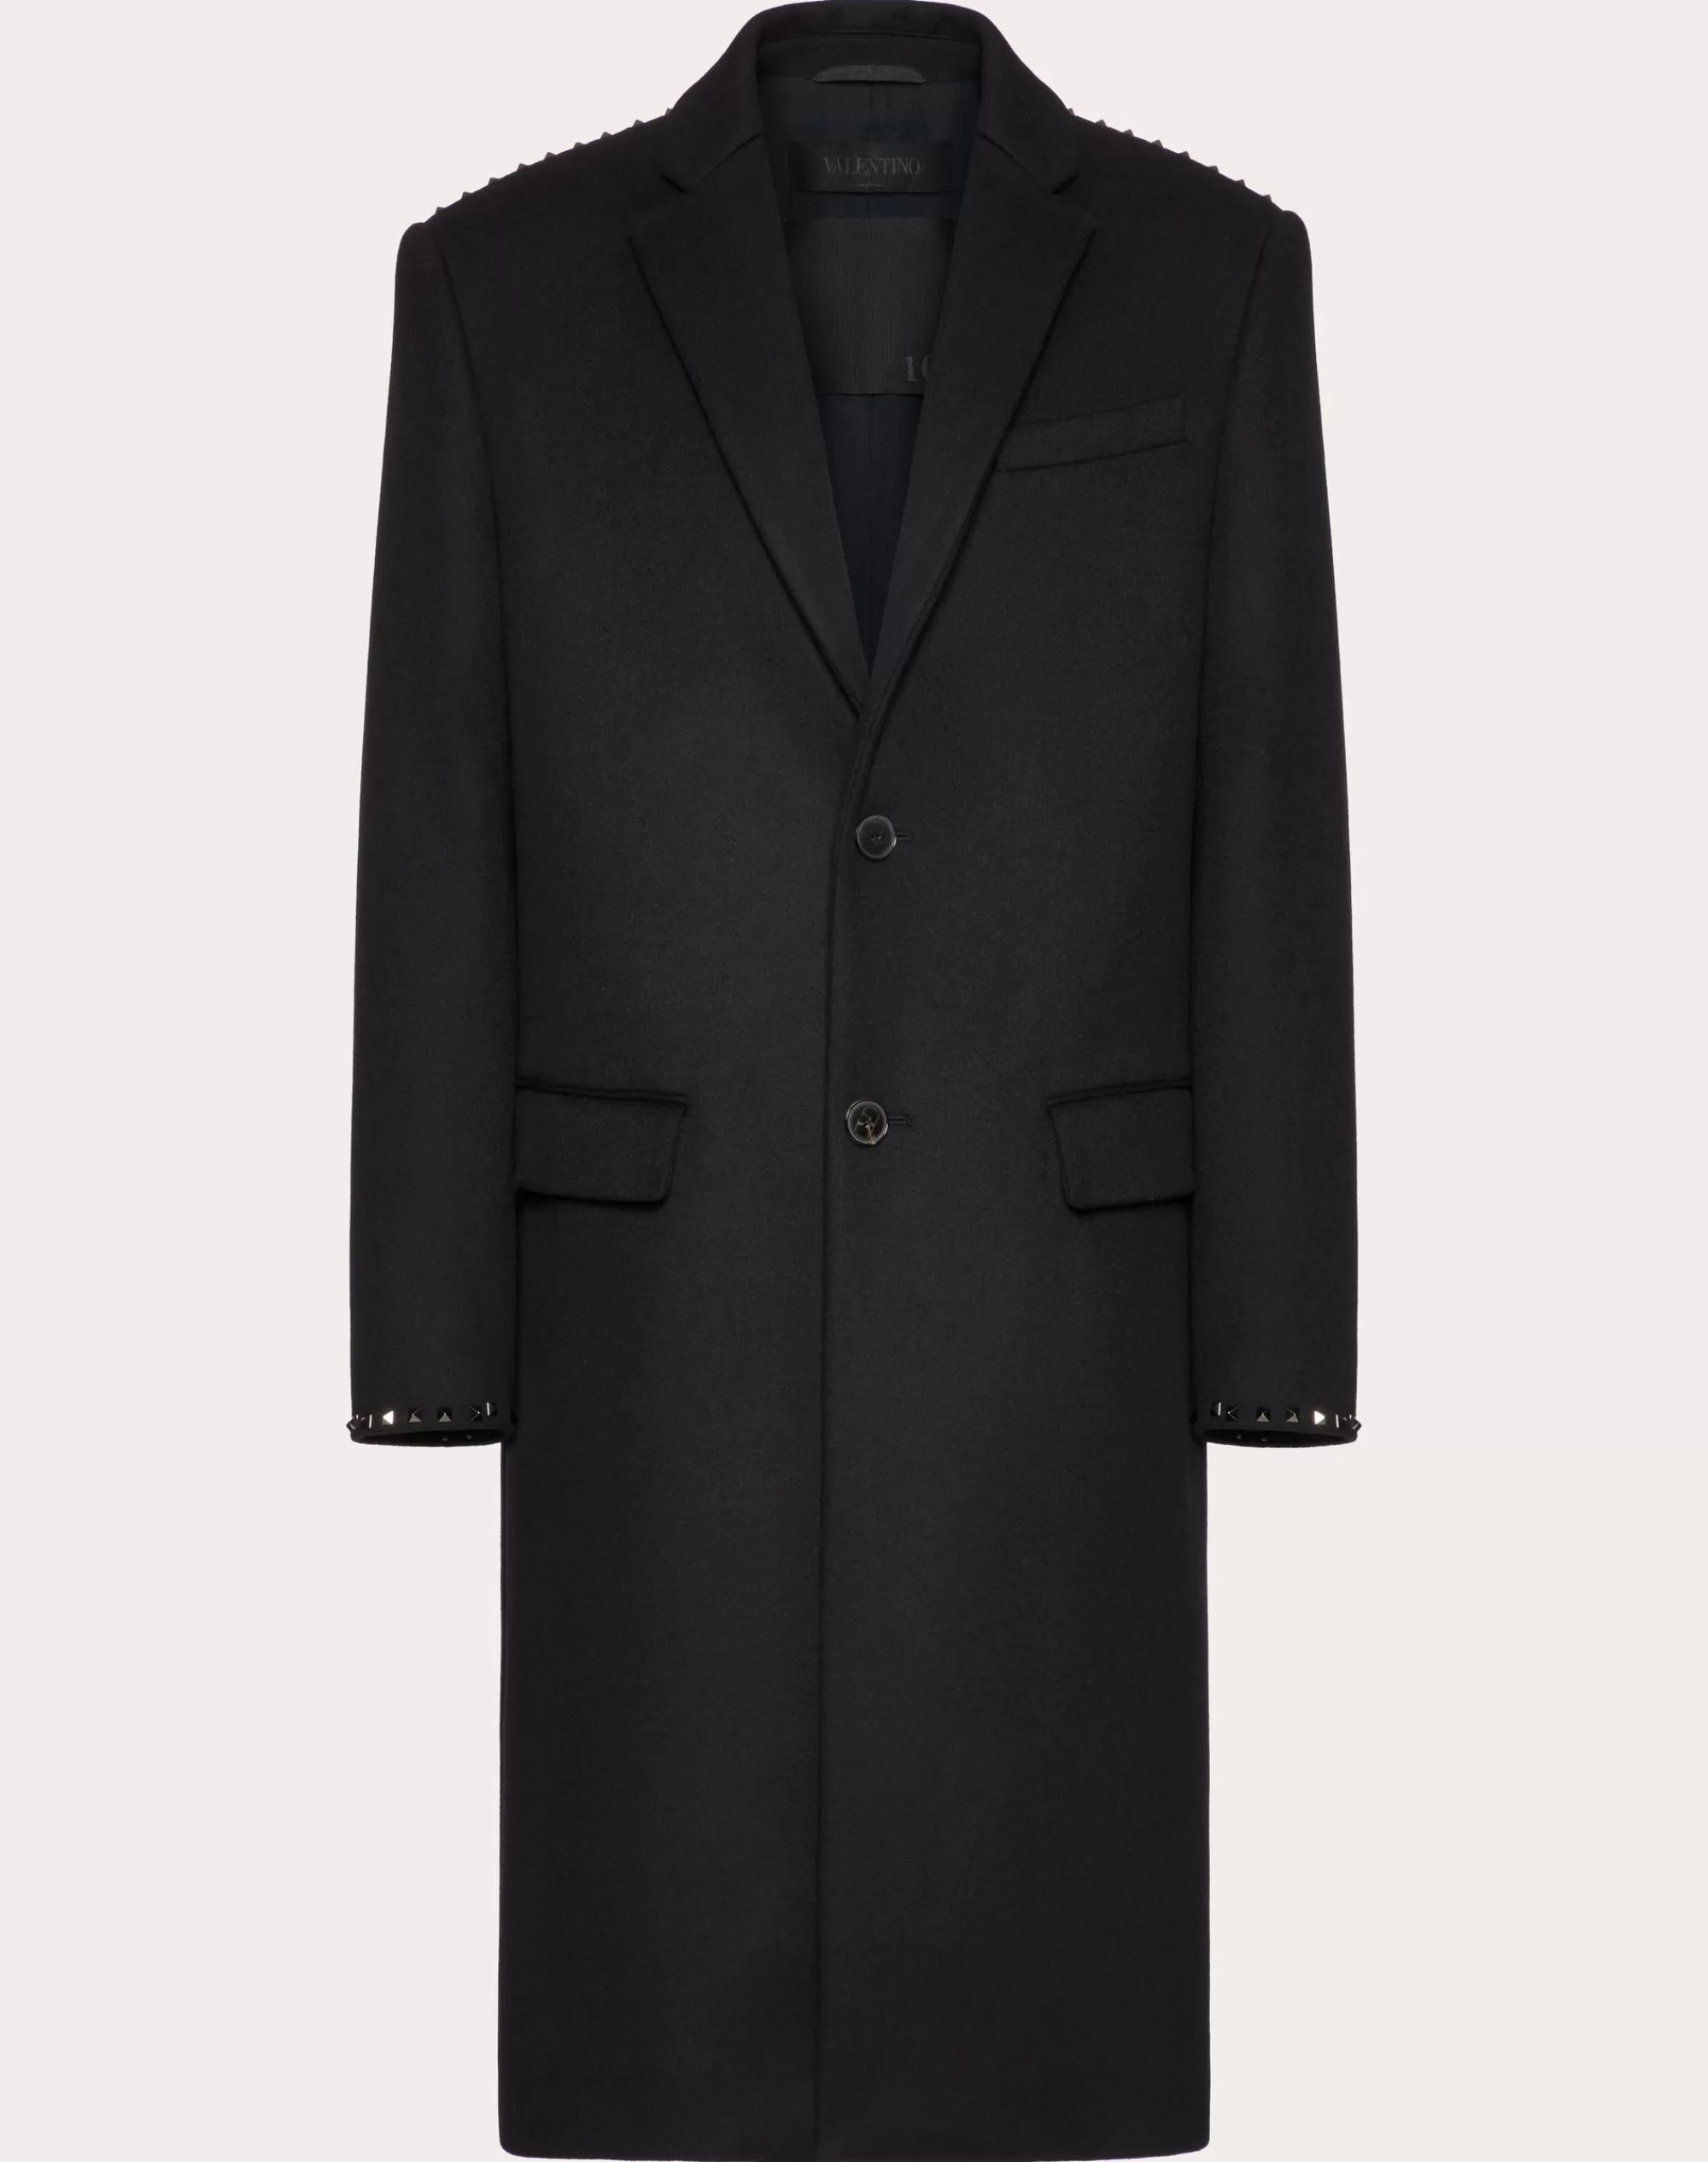 Valentino SINGLE BREASTED COAT IN DOUBLE-FACED WOOL AND CASHMERE WITH UNTITLED STUDS Black Sale